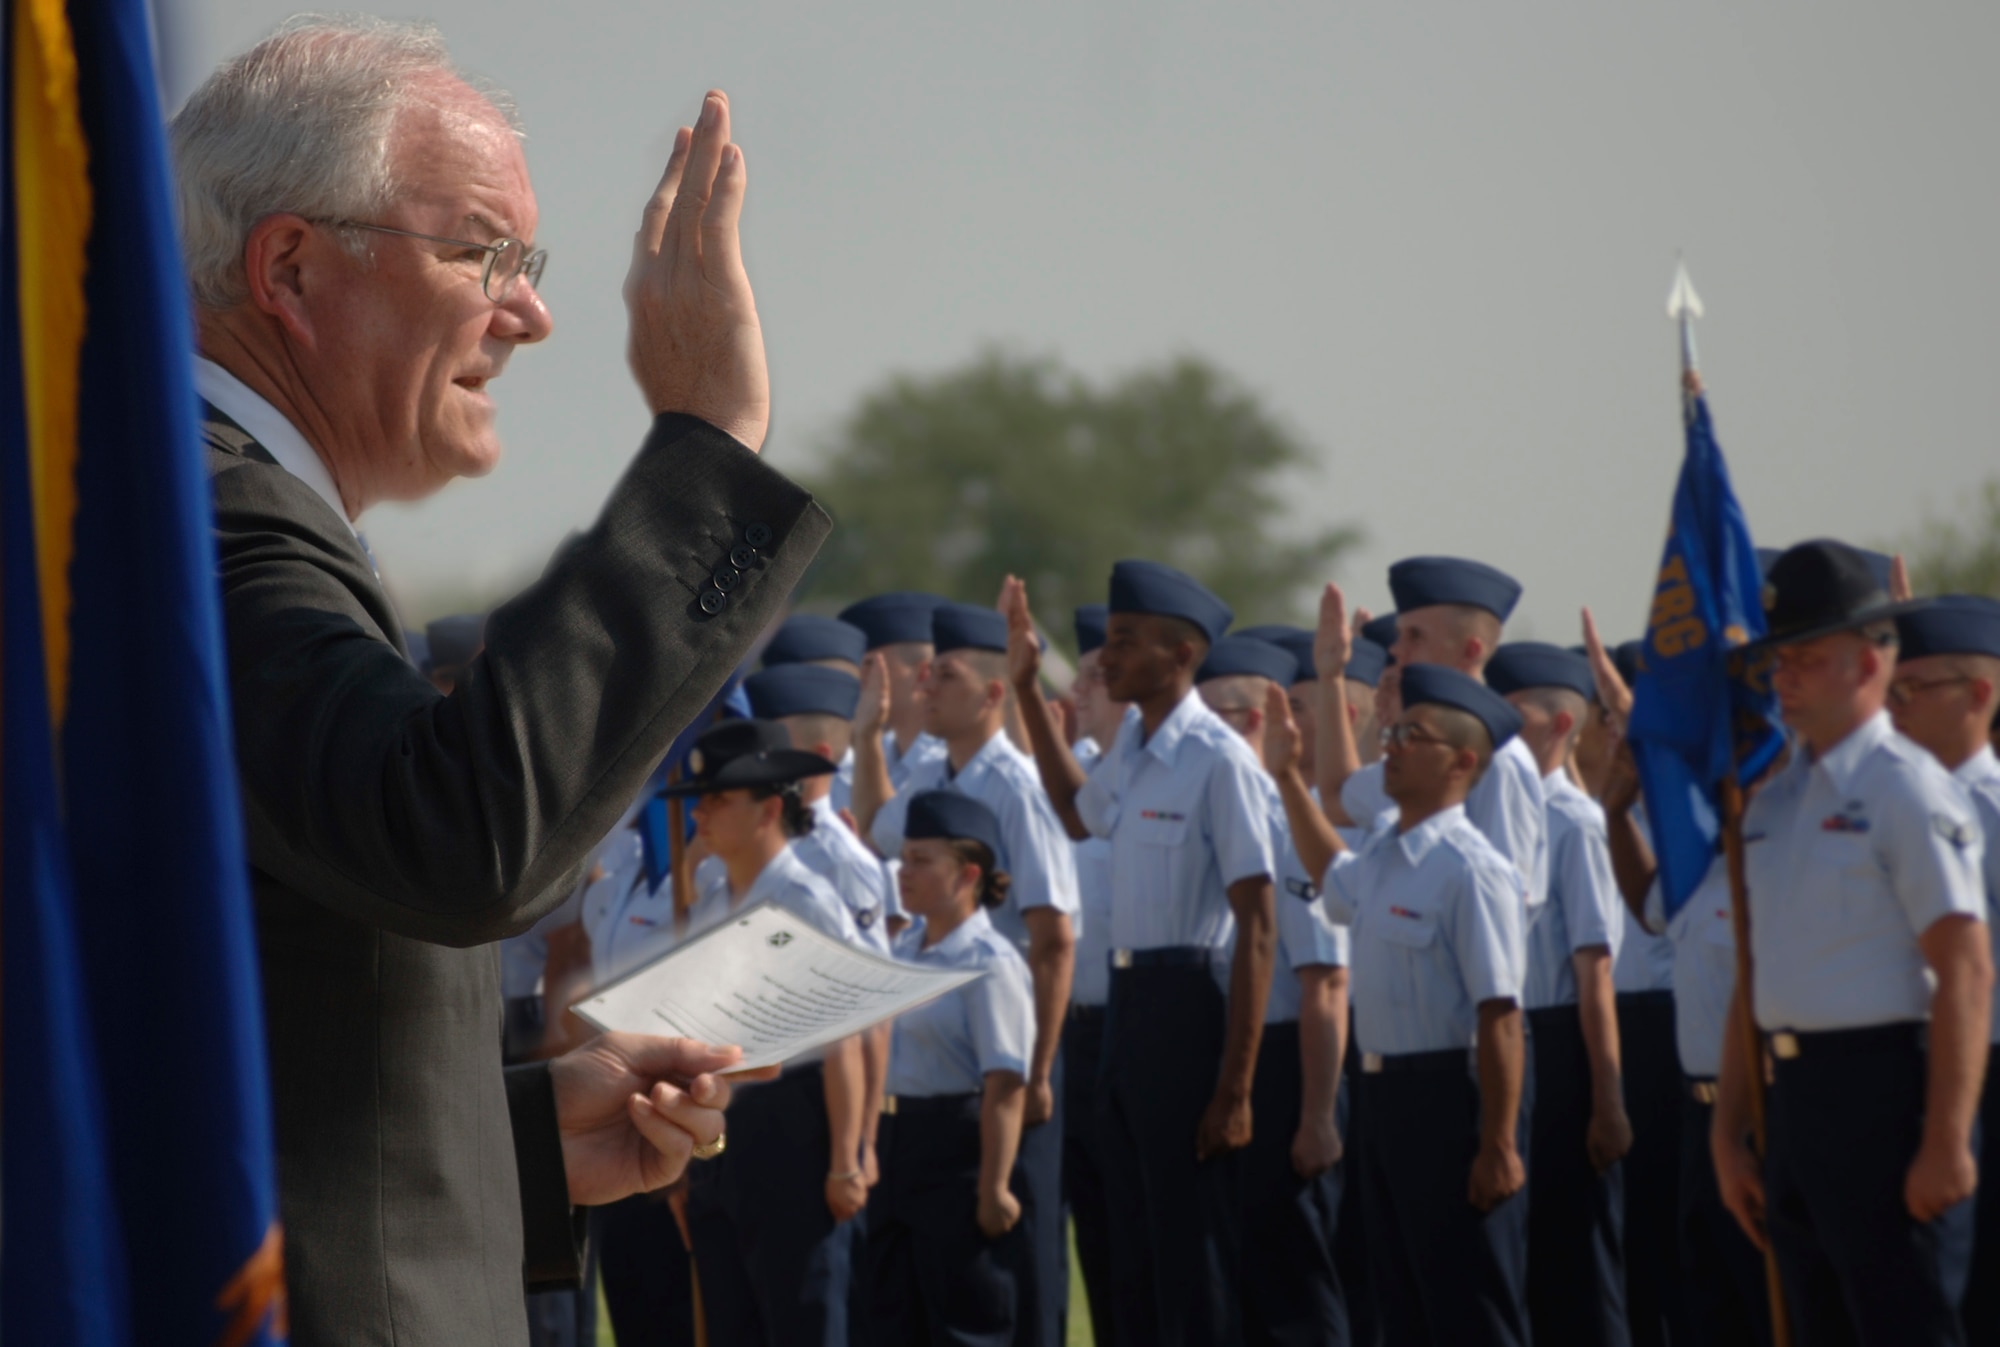 Secretary of the Air Force Michael W. Wynne administers the Oath of Enlistment to basic training graduates on the parade grounds at Lackland Air Force Base, Texas, on Friday, June 2, 2006. Secretary Wynne was in San Antonio visiting various military installations and training sites. (U.S. Air Force photo/Tech. Sgt. Cecilio M. Ricardo Jr.)